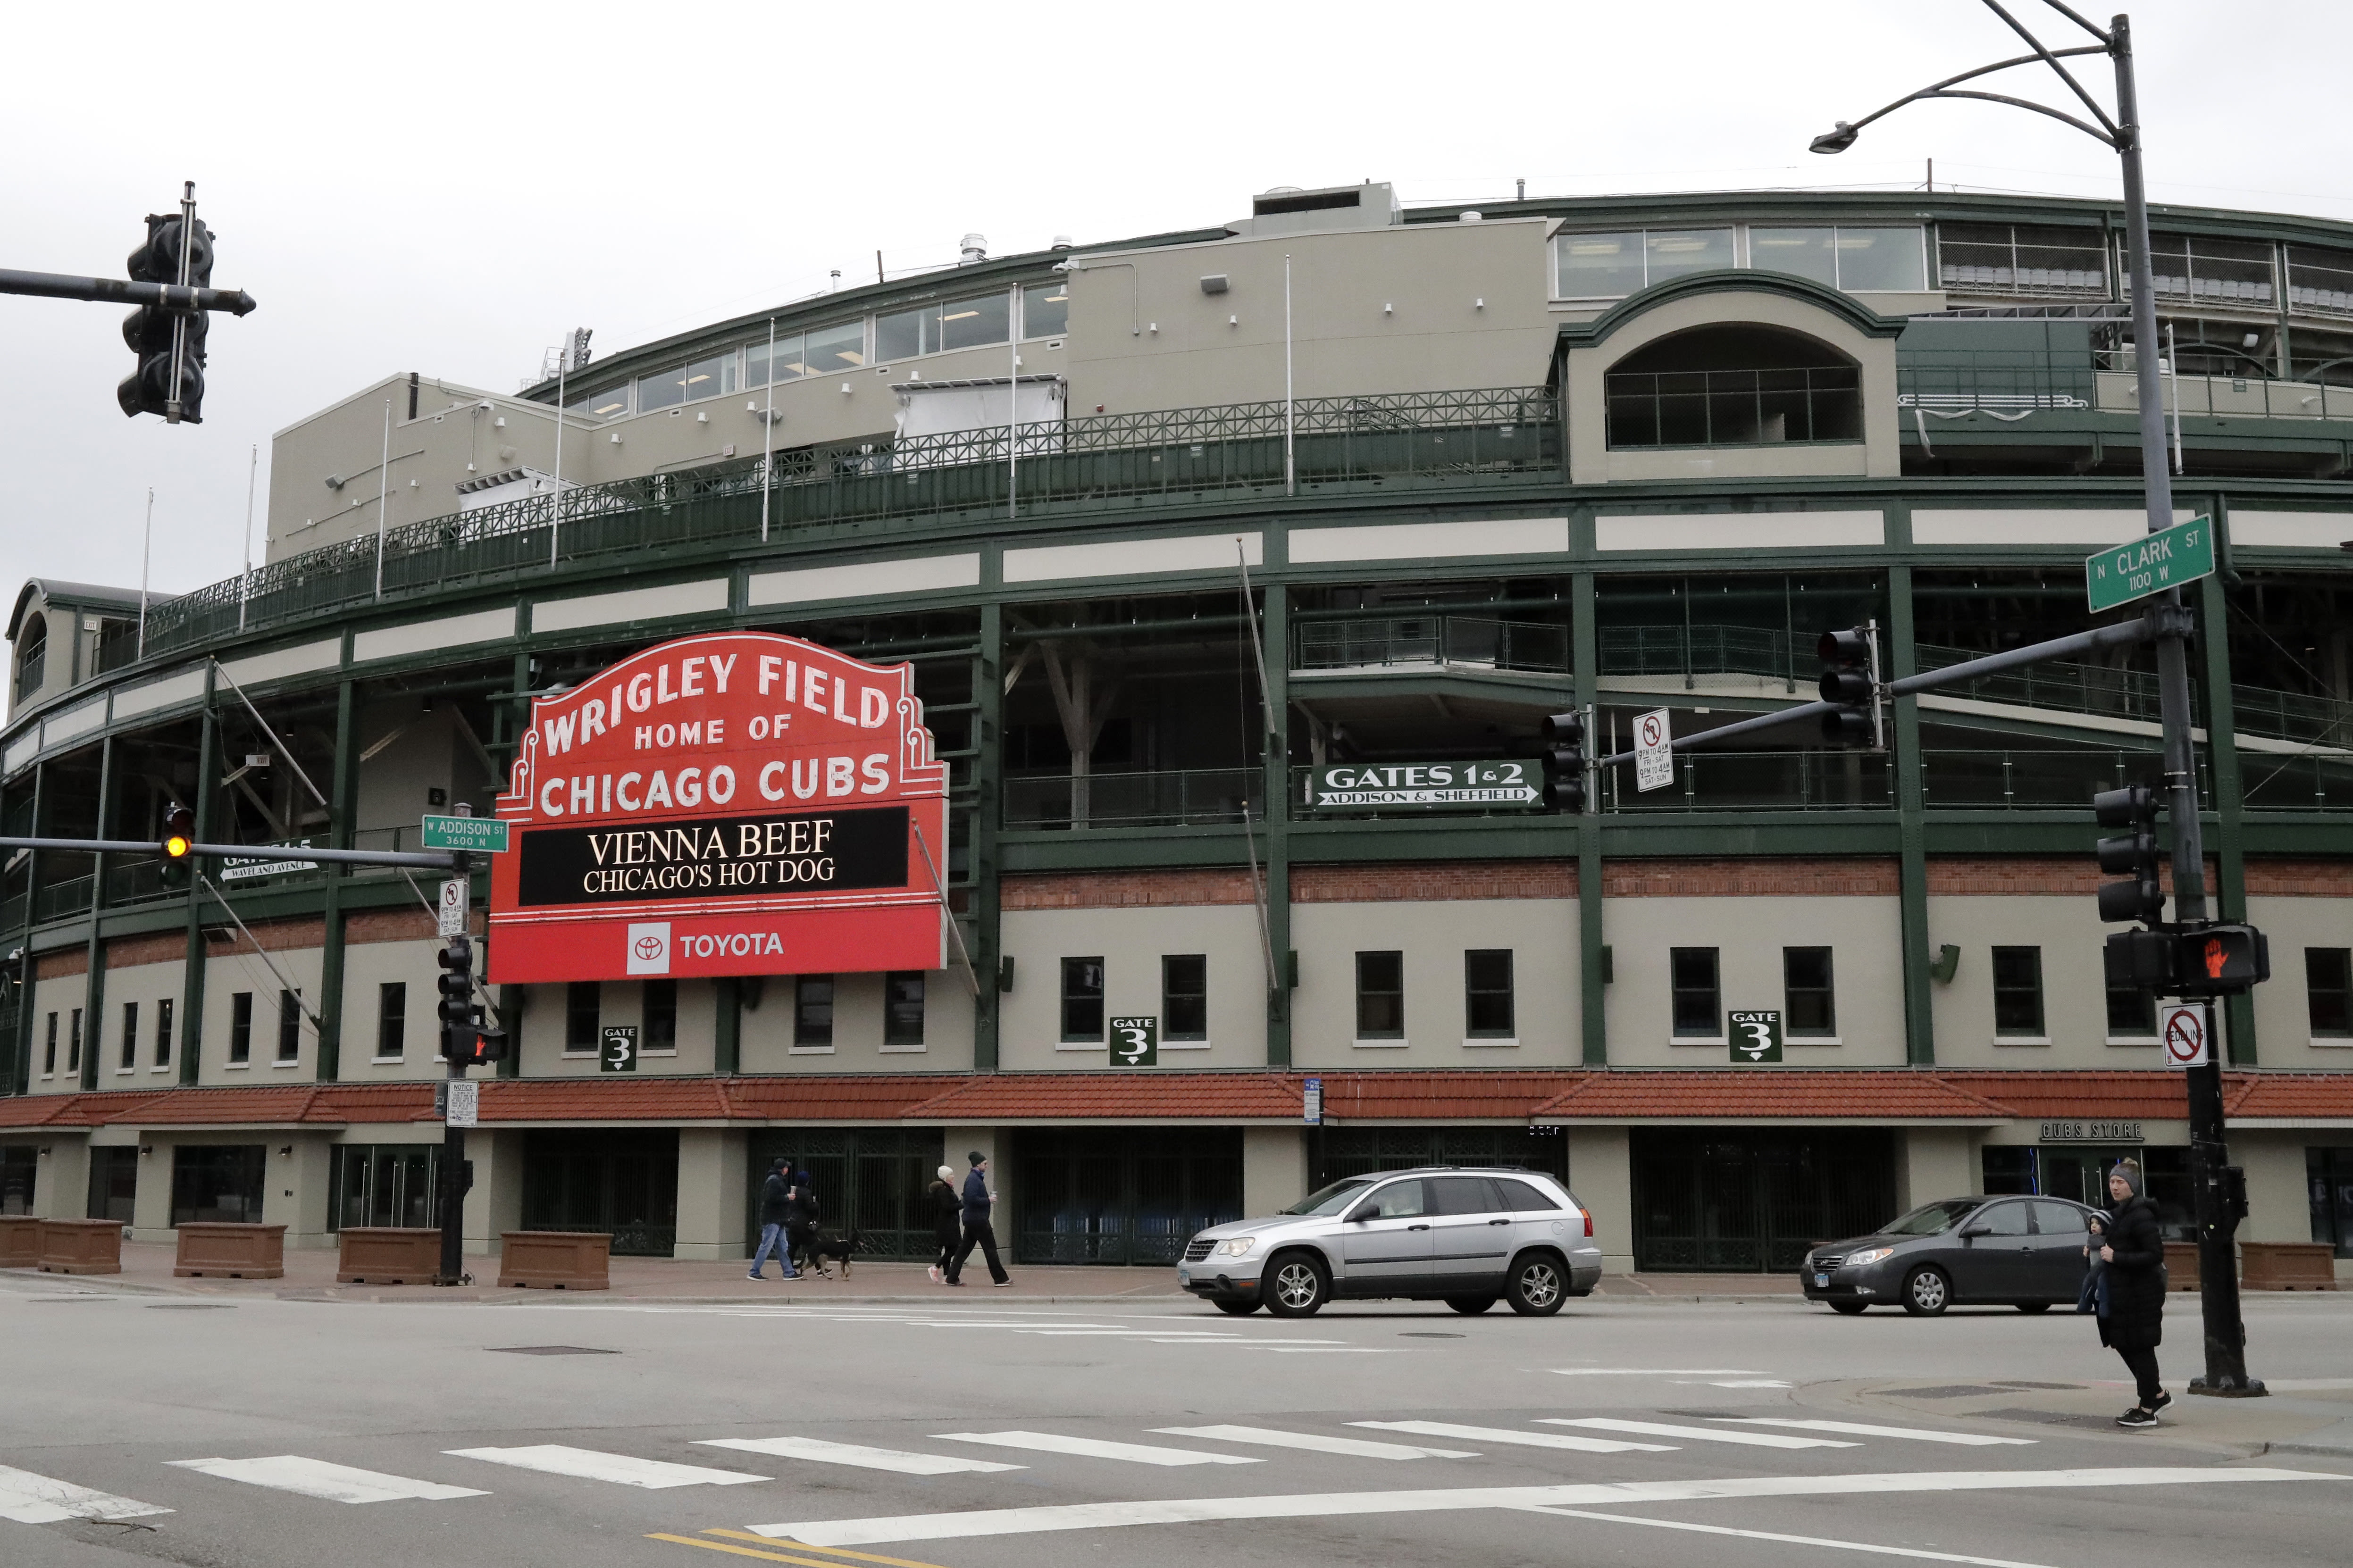 Red Stars' match at Wrigley Field the latest sign of club's turnaround